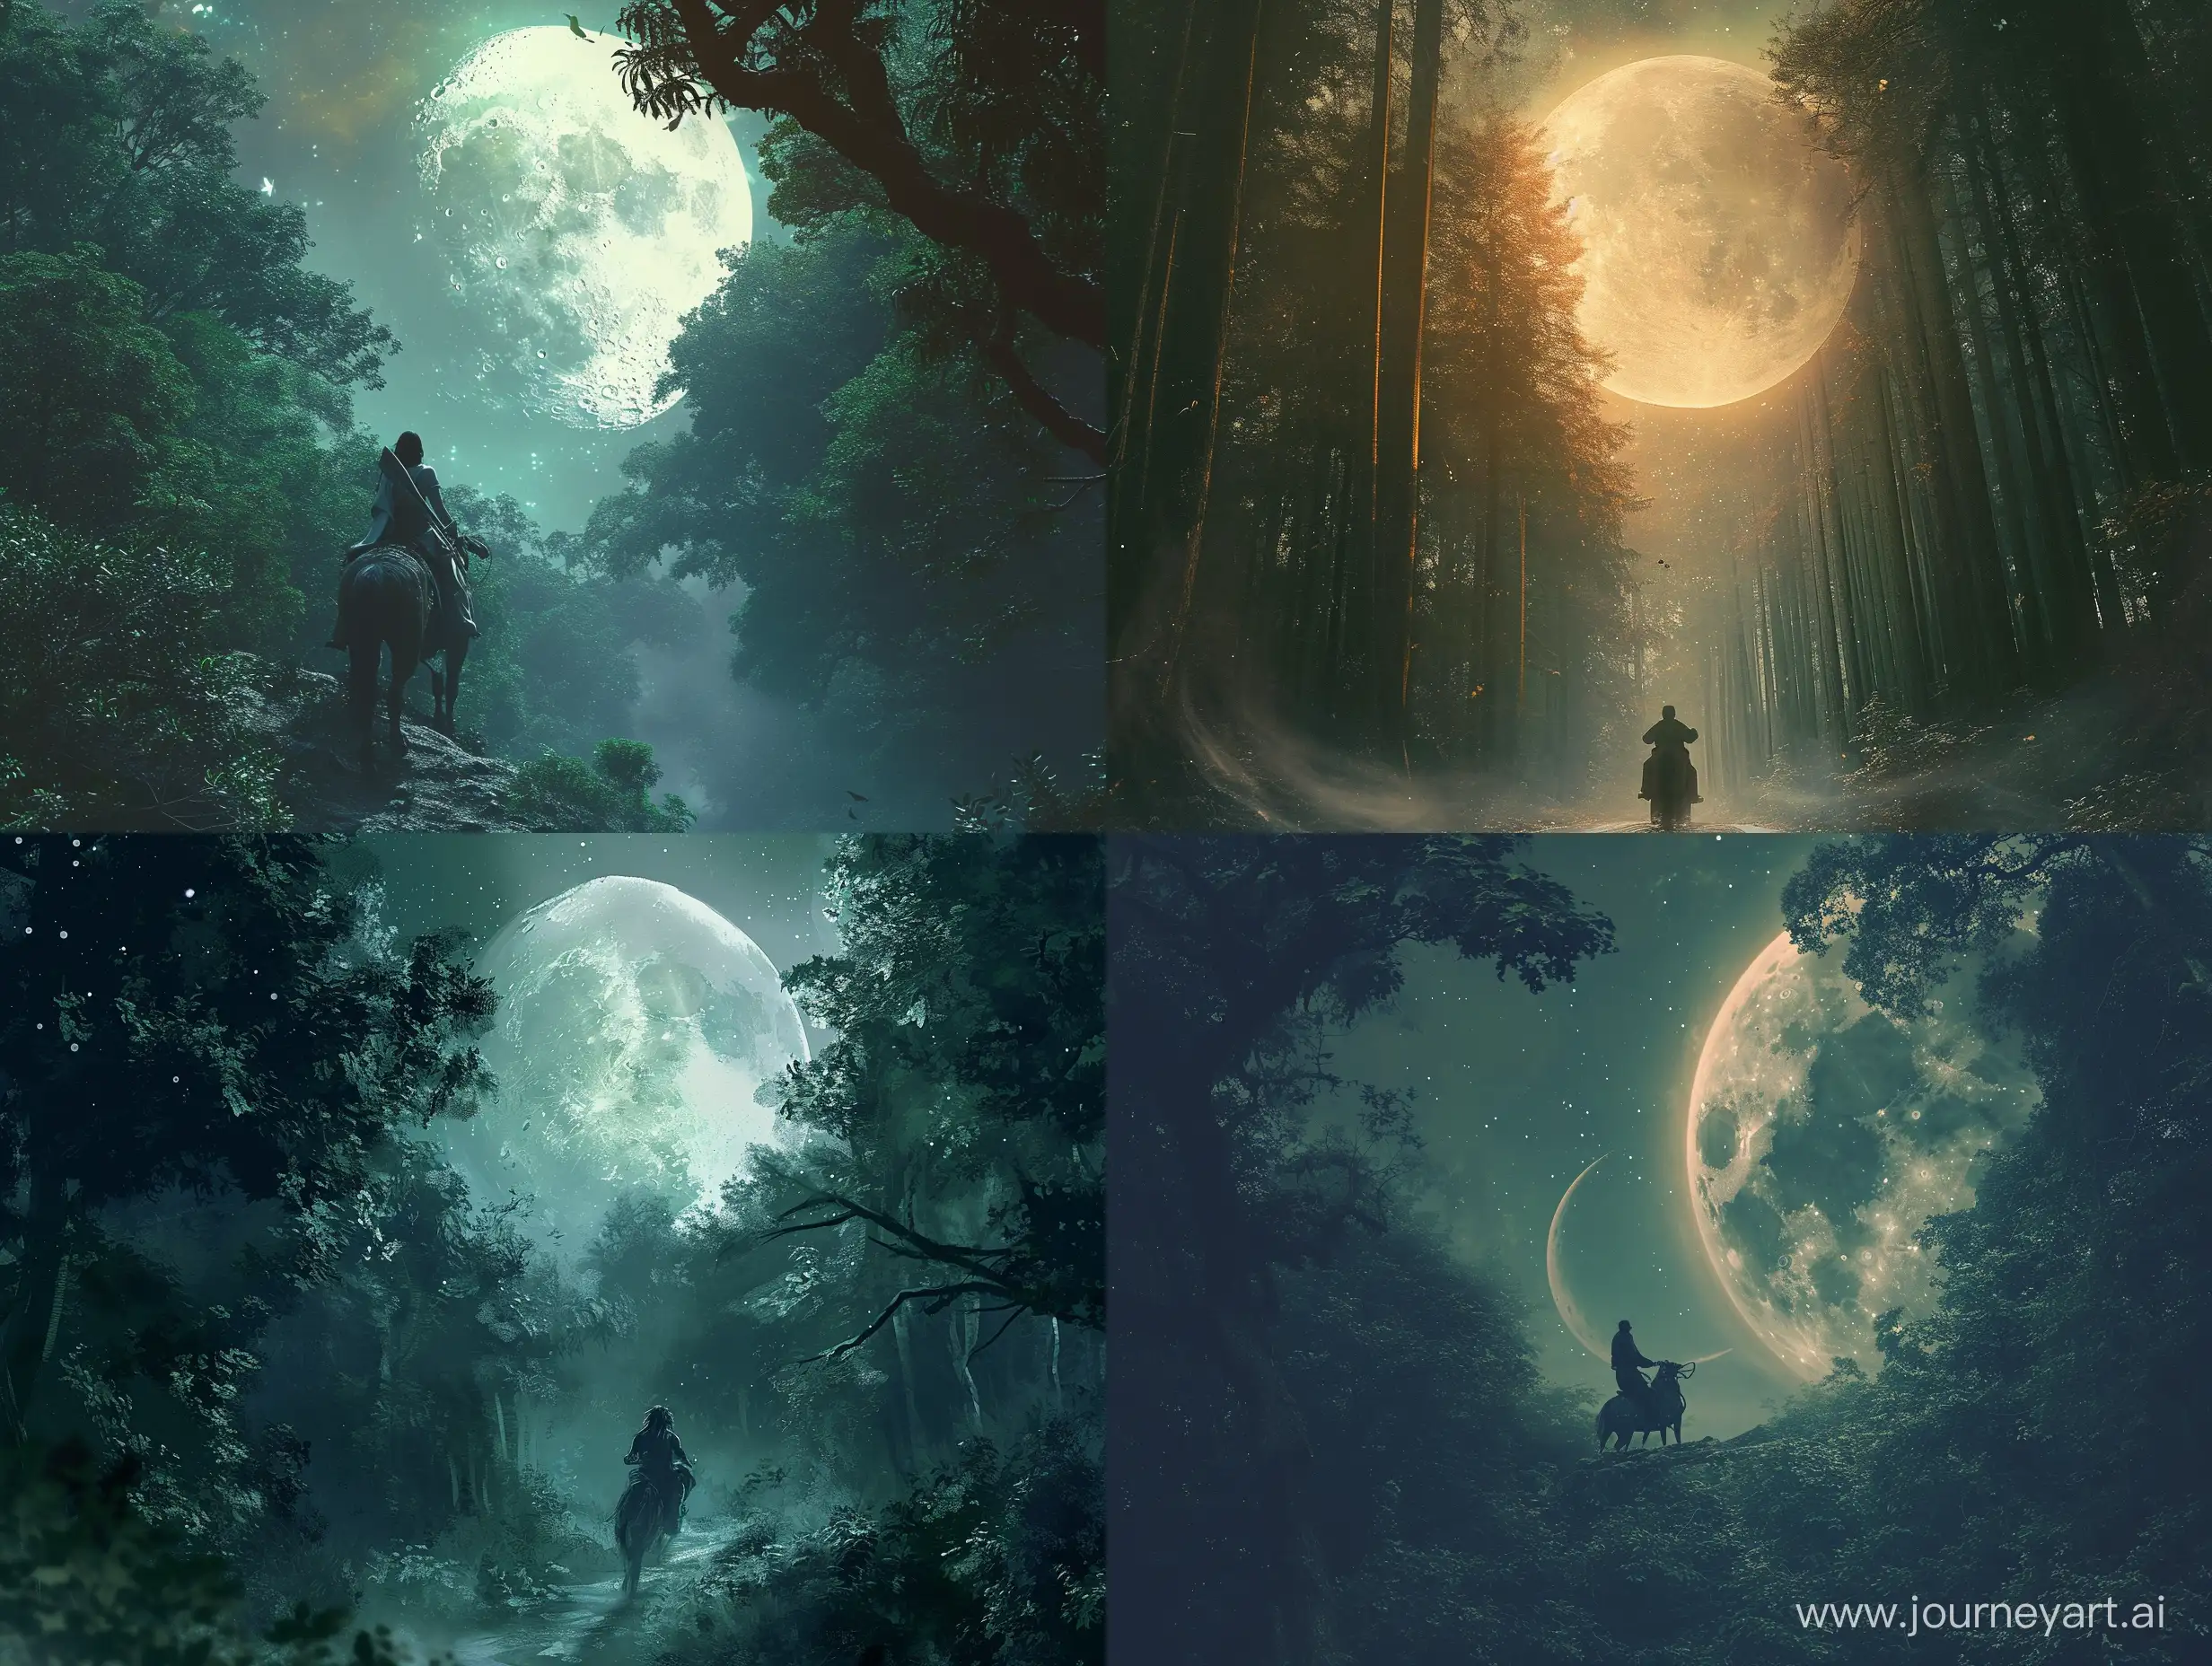 Enchanted-Moonlit-Journey-Lone-Rider-in-Dense-Forest